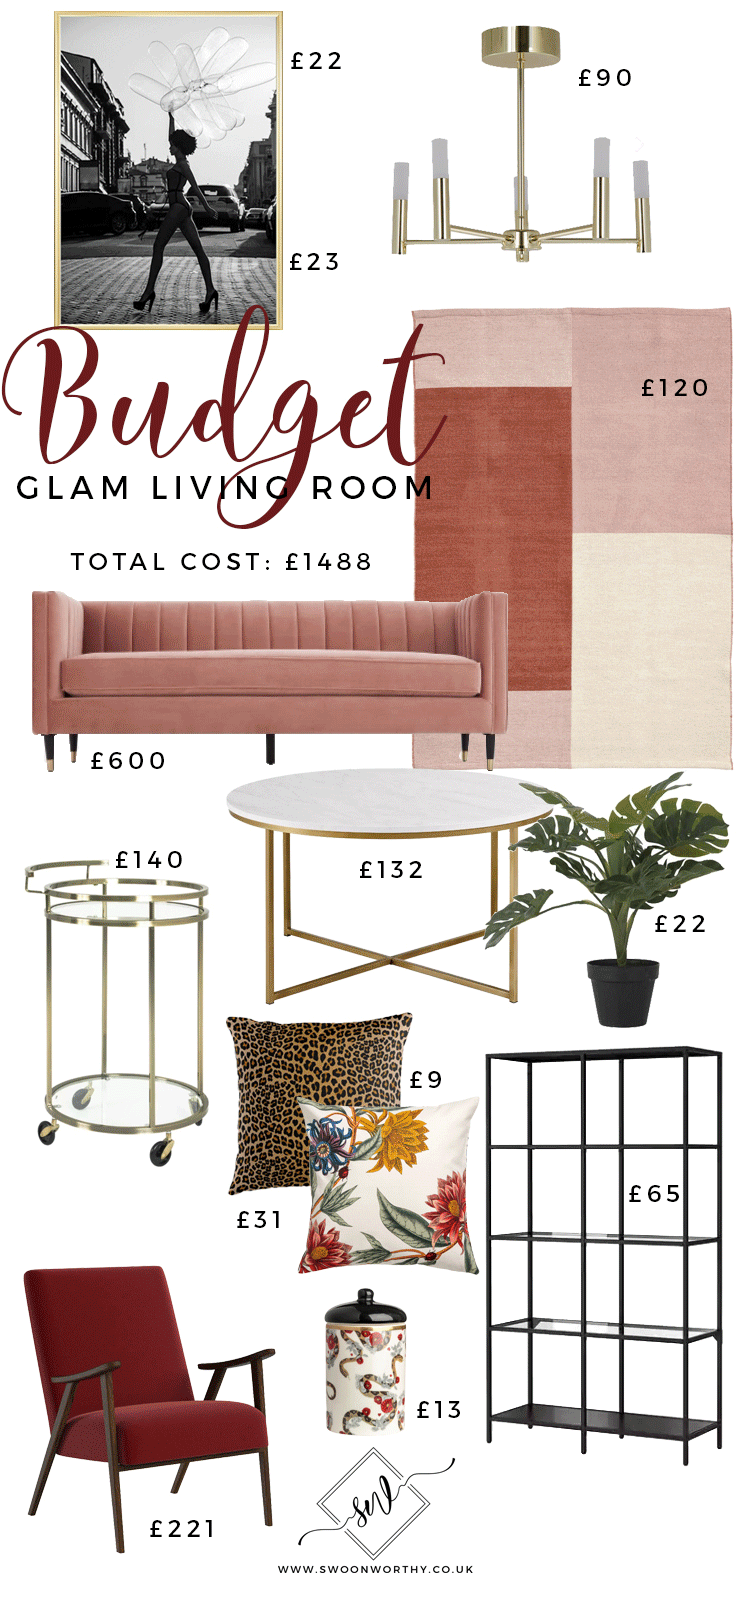 1 Glam Living Room with 3 budgets Gif